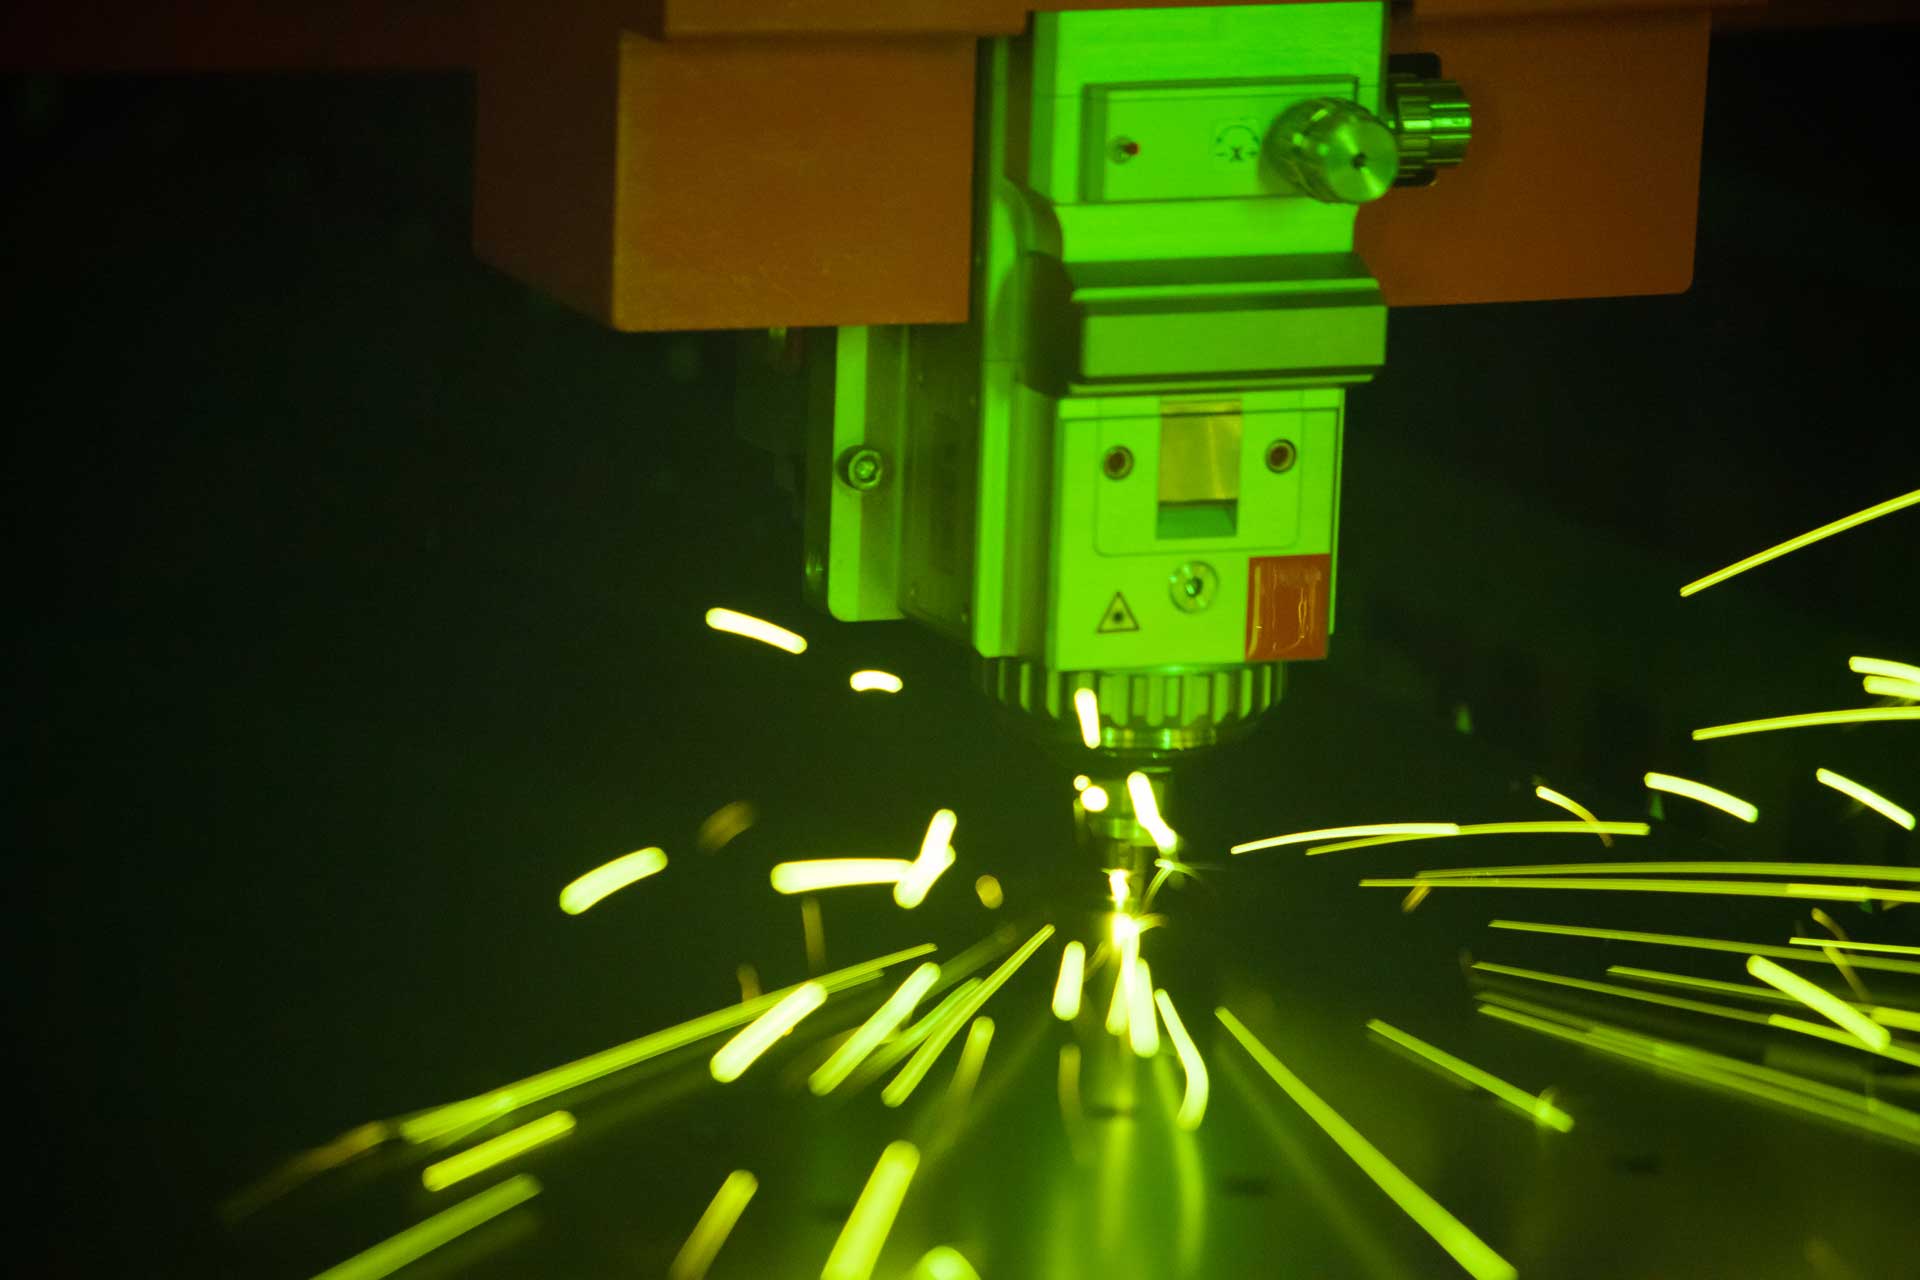 CNC machine cutting flat custom aluminum parts with sparks flying and a bright green cast. star's numerous careers offered. 